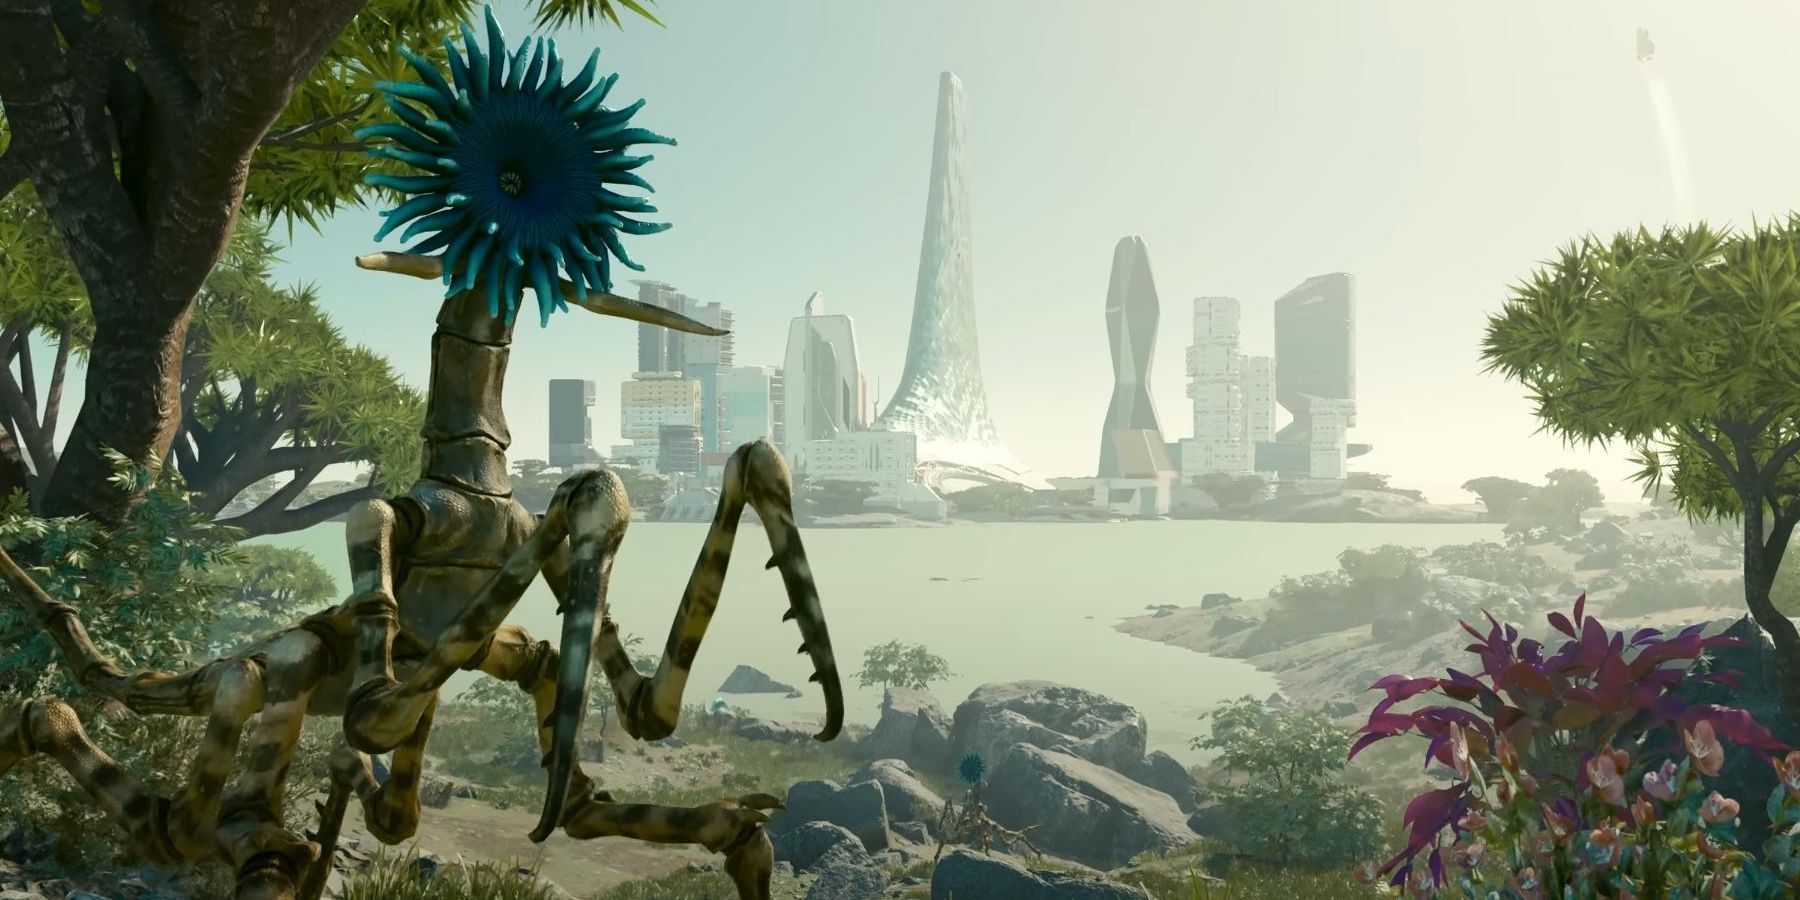 An alien in Starfield with a grasshopper-like body and a spiny, star-shaped face stands against the New Atlantis skyline.